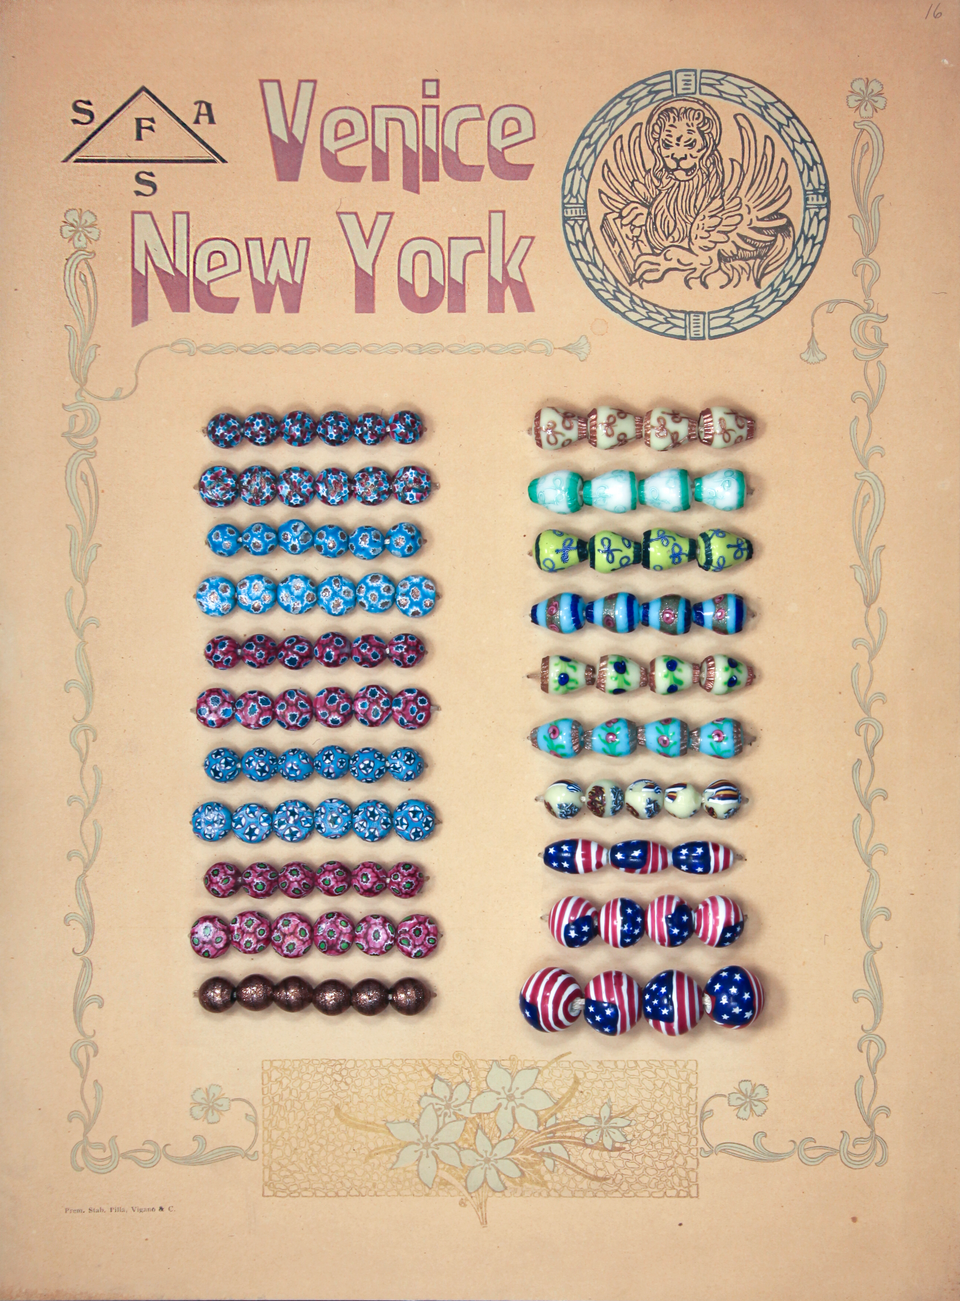 A card with the text "Venice, New York" and with attached Millefiori and Flag Beads.